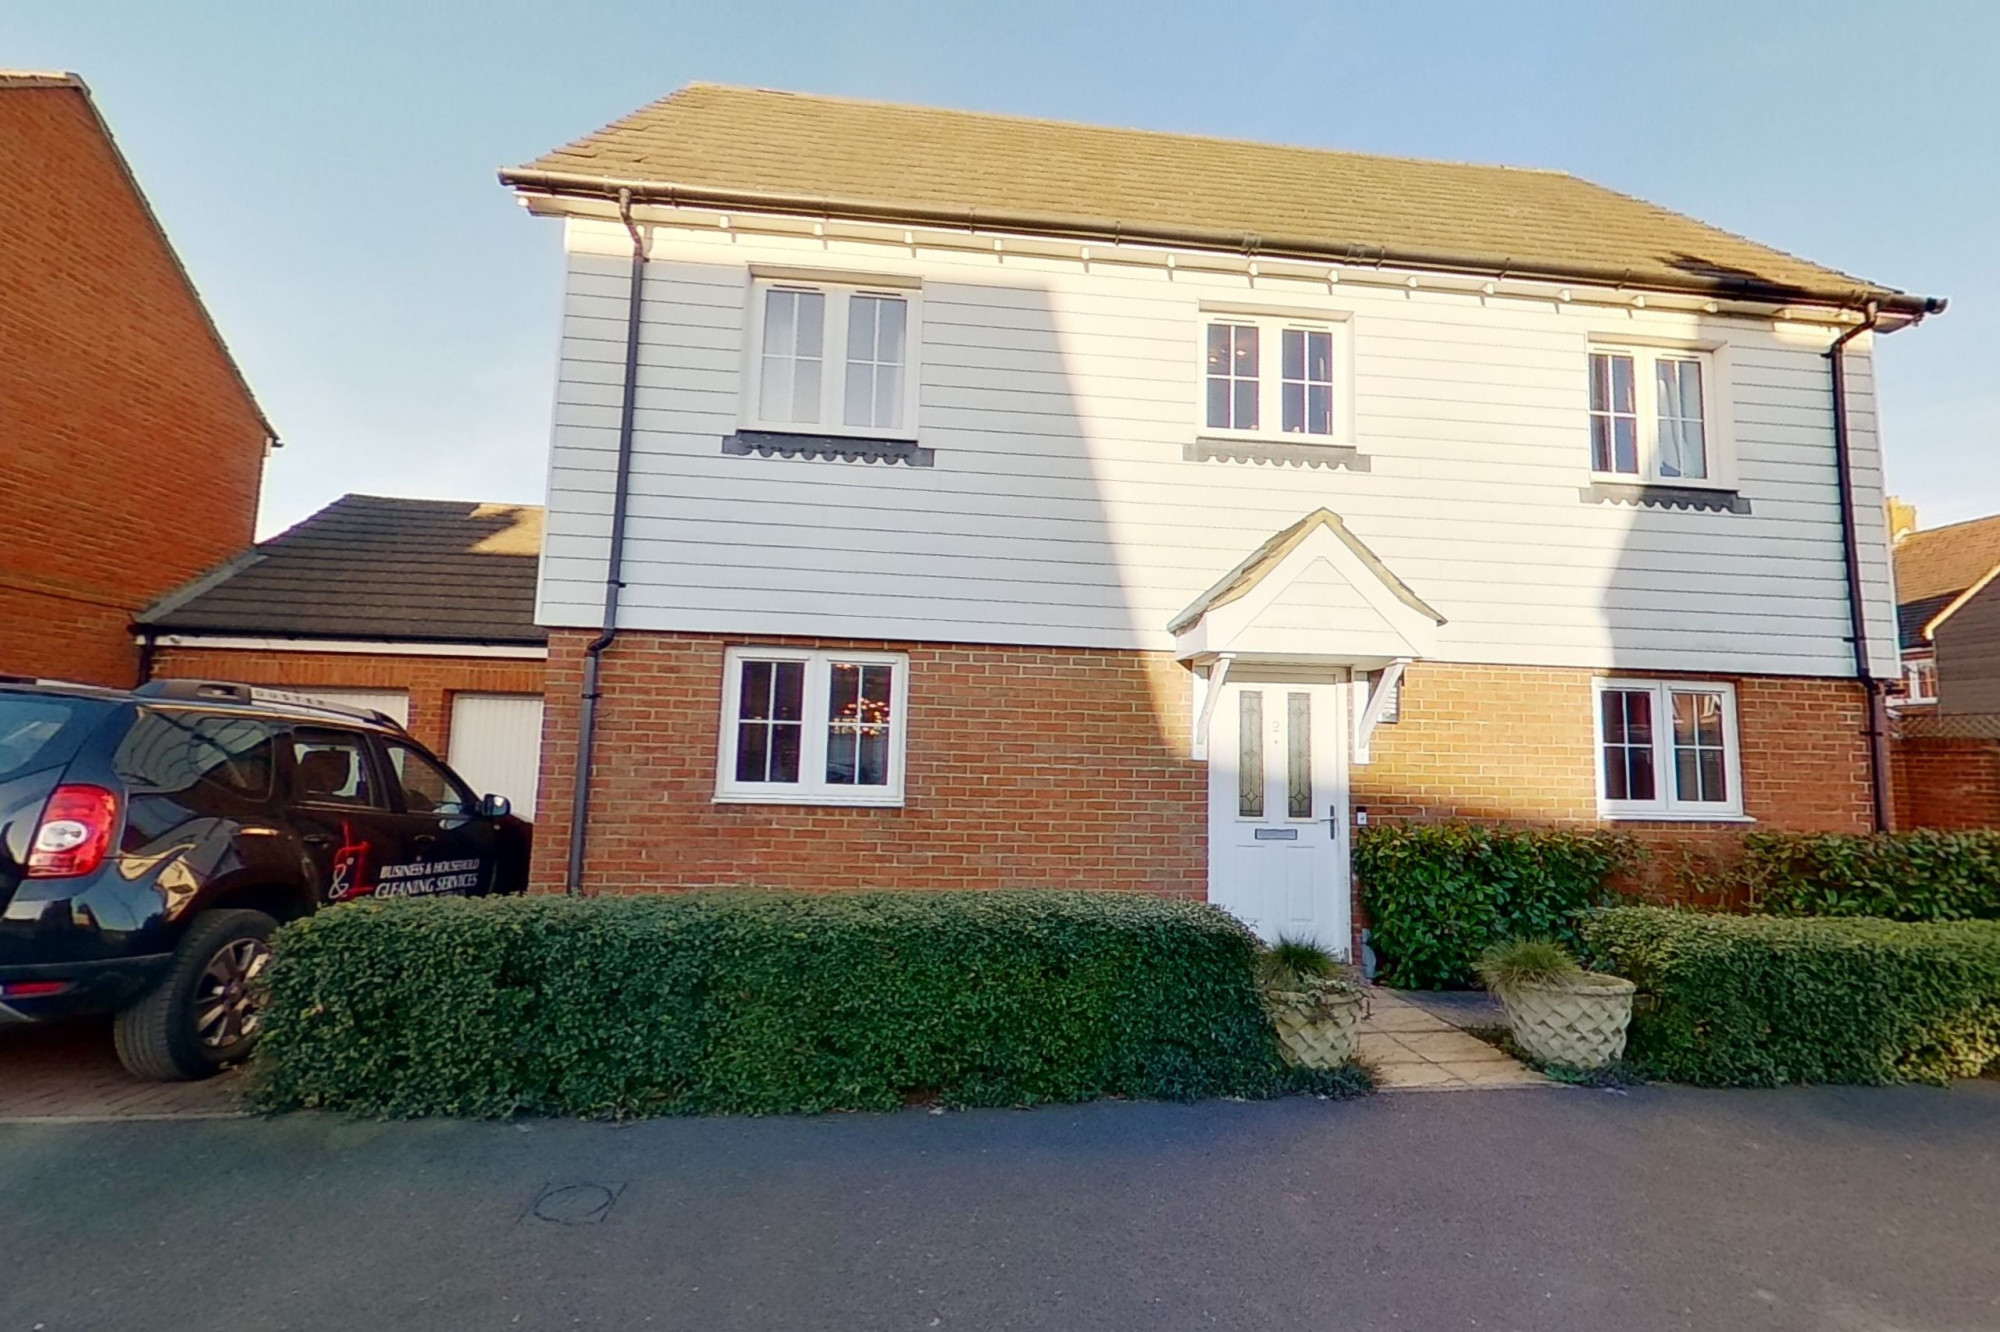 4 bed house for sale in ashford